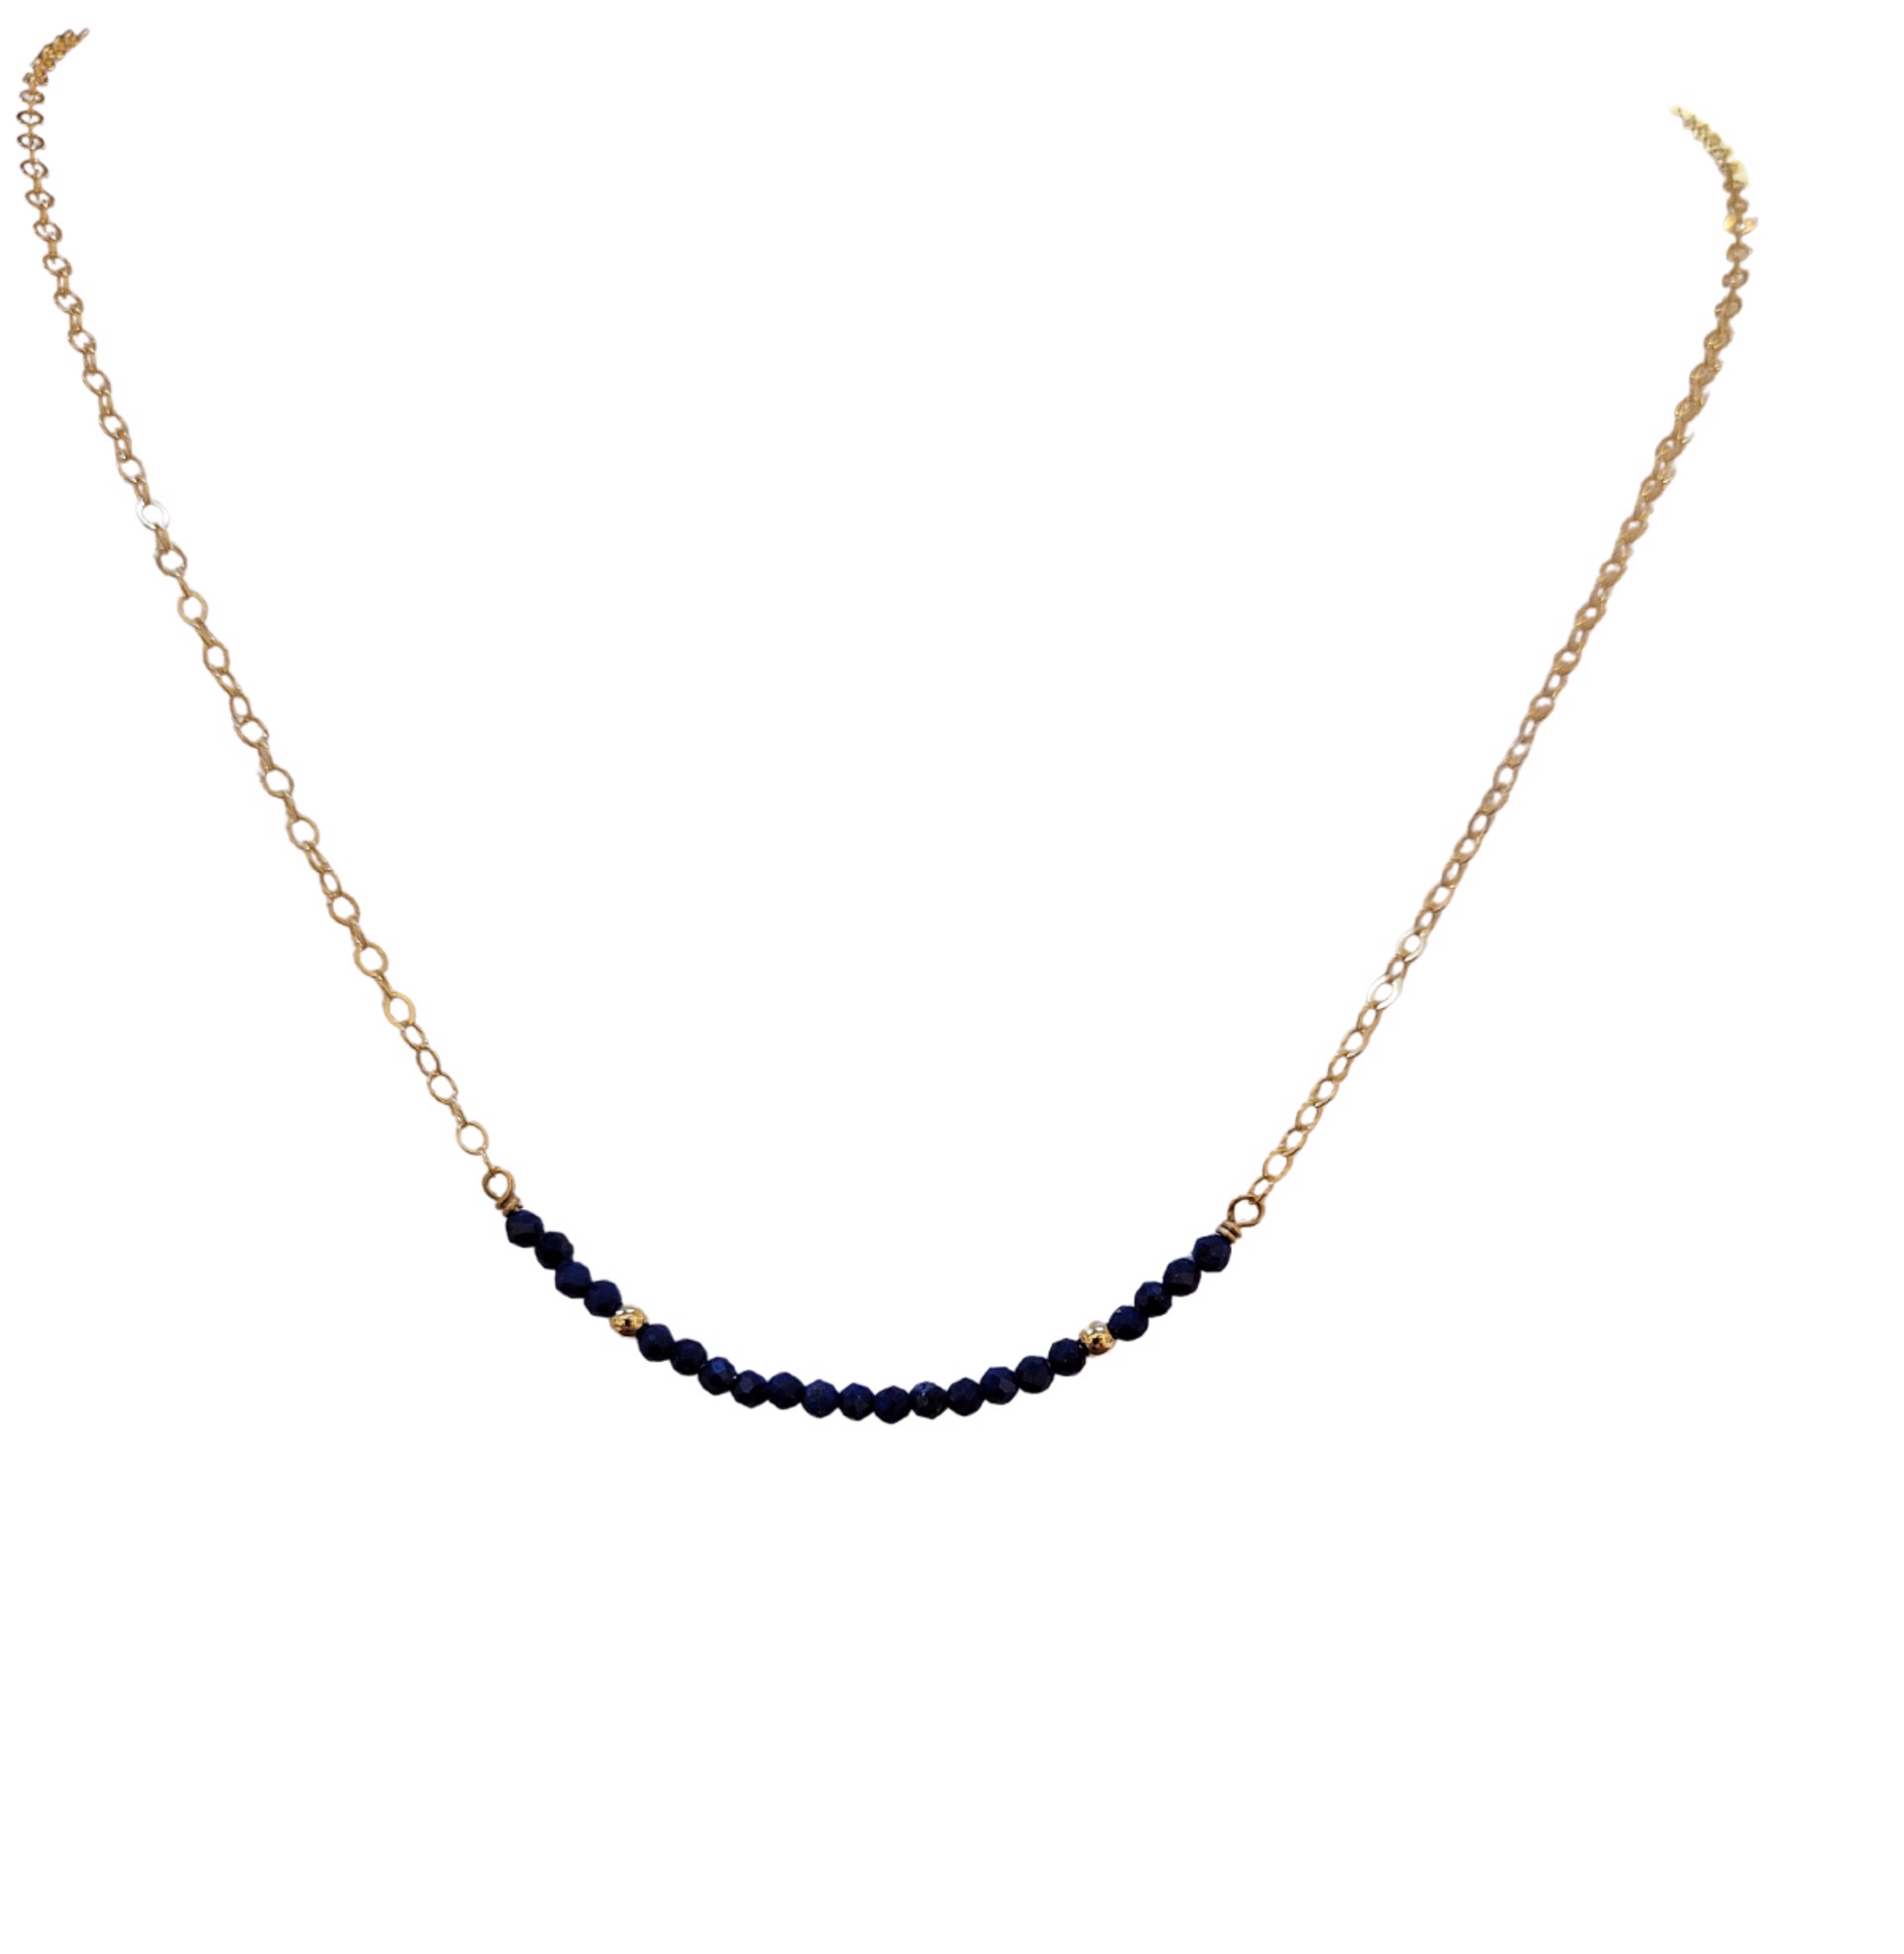 Necklace - Lapis Bar 14K Gold Filled by Julia Balestracci